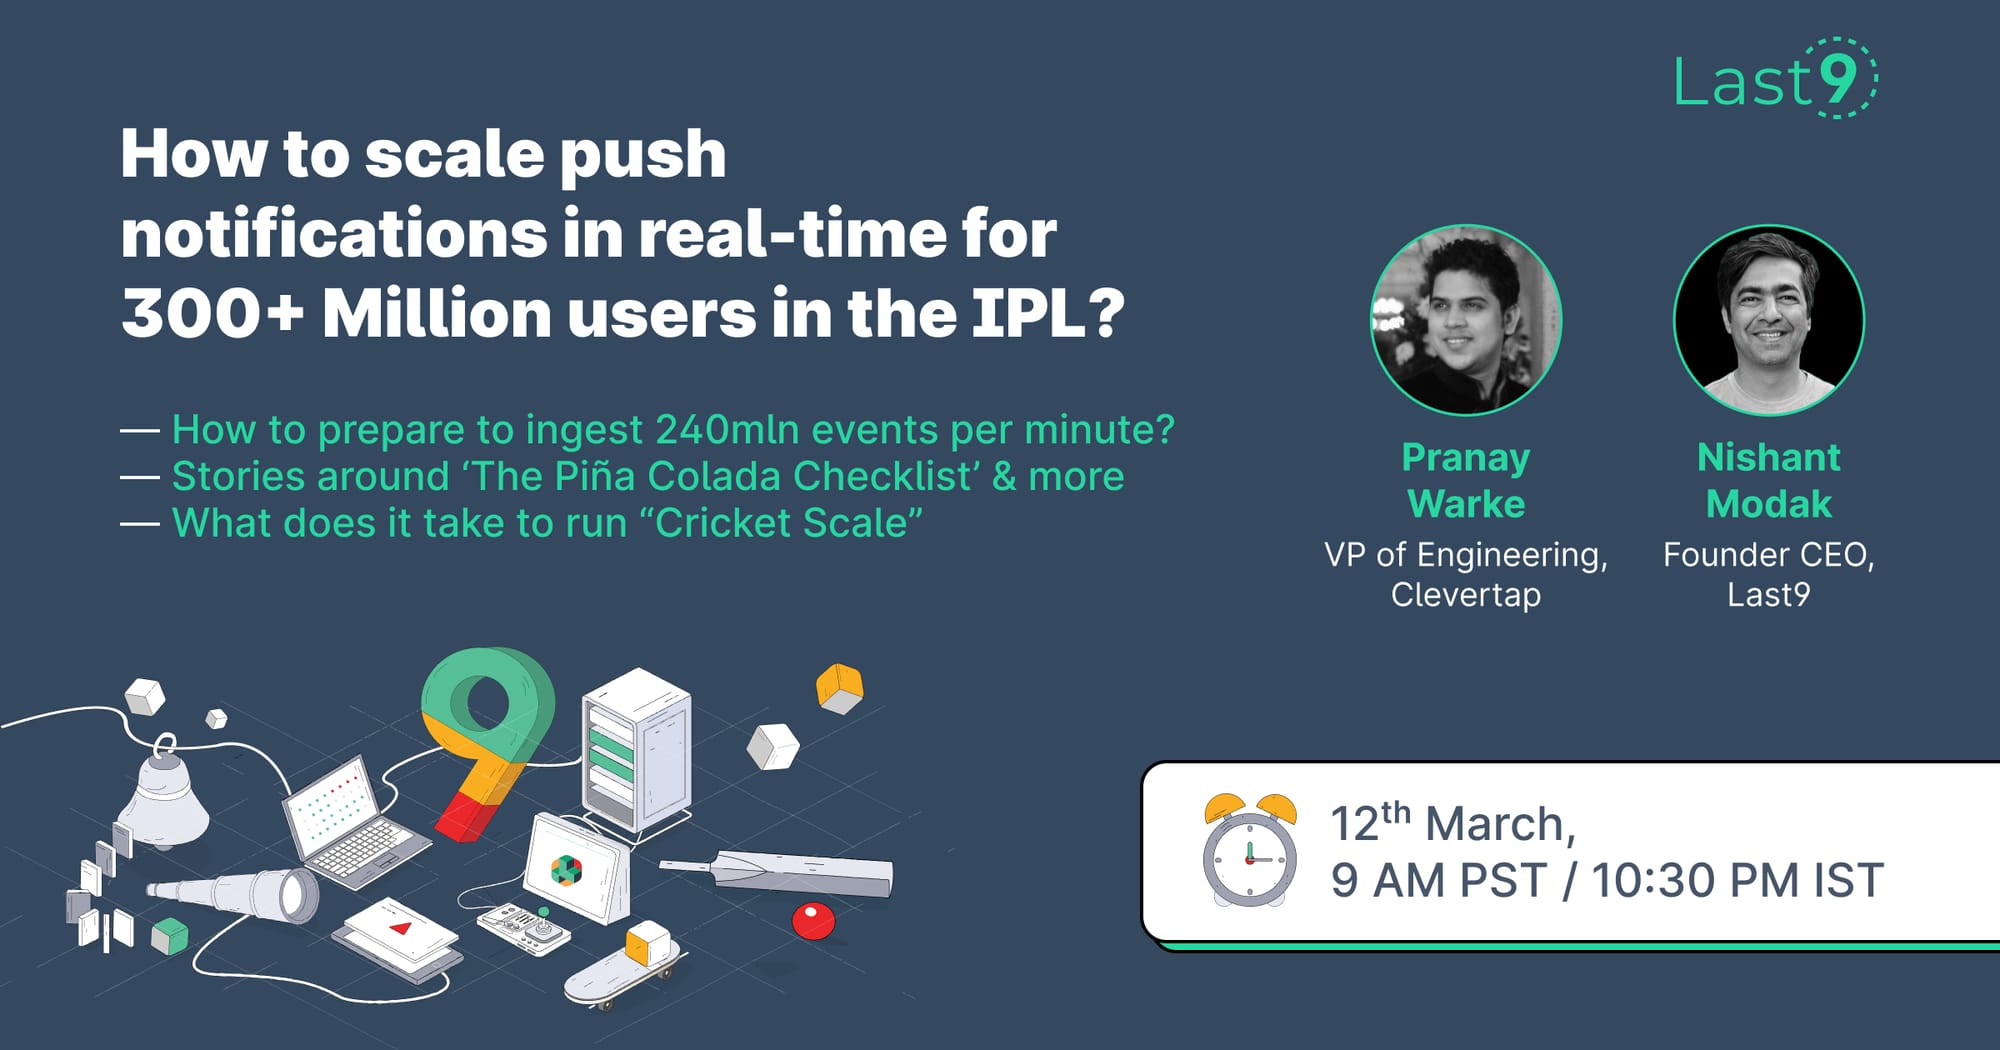 Cricket Scale Series #2: How to scale events in real-time for IPL for 300+ Million users